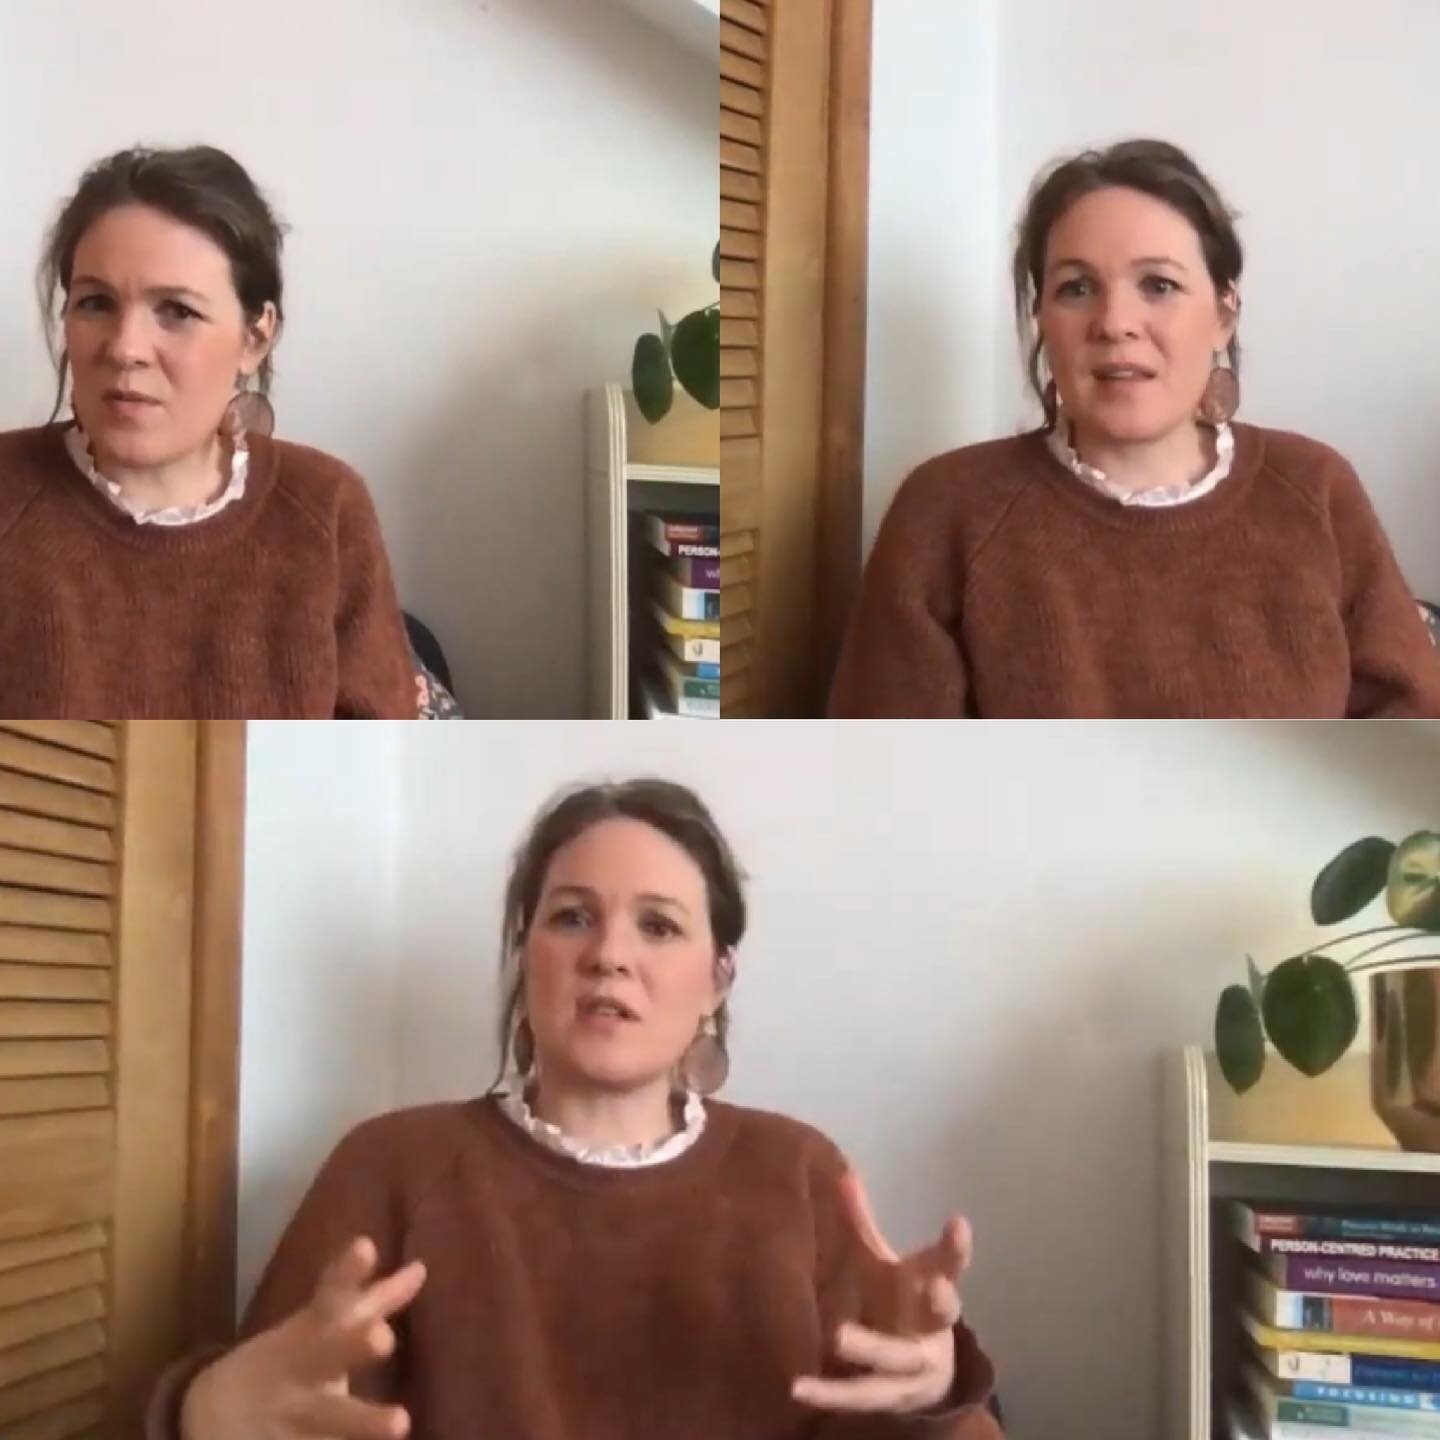 A little while ago, I spoke about maternal mental health for Nissa&rsquo;s @the_hypnobirthing_midwife &lsquo;Hypnobirthing Mums Club&rsquo;. Because it was recorded, anyone can view it (link in bio). We touched upon the isolation of being pregnant an